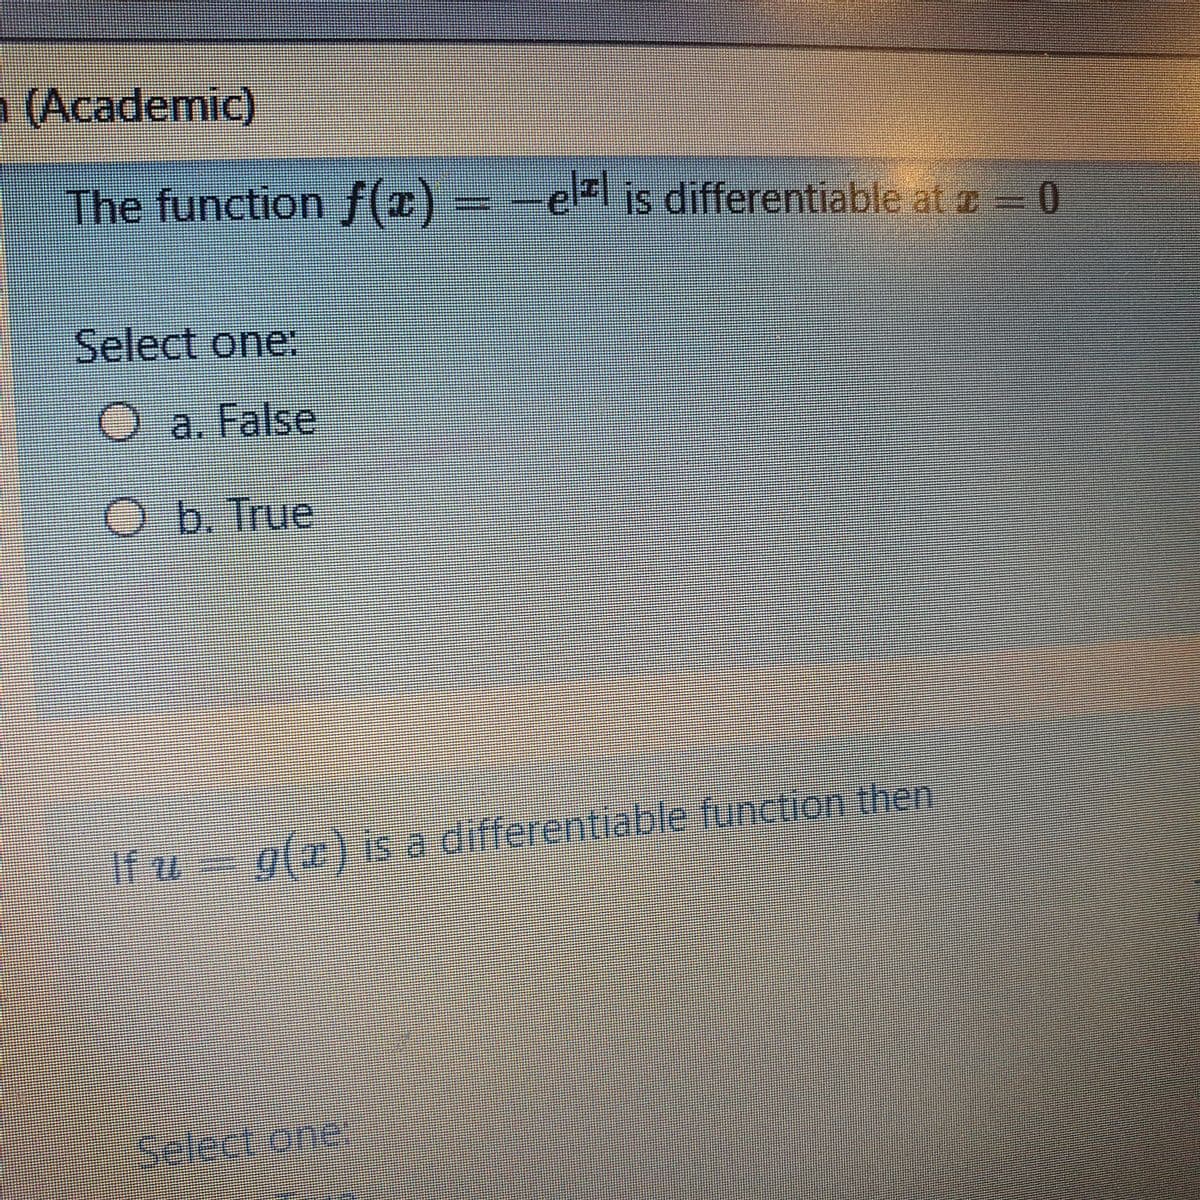 1 (Academic)
The function f(z) = -e is differentiable at e= 0
Select one:
a. False
O.b. True
If u= g(x) is a differentiable function then
Select one
l
